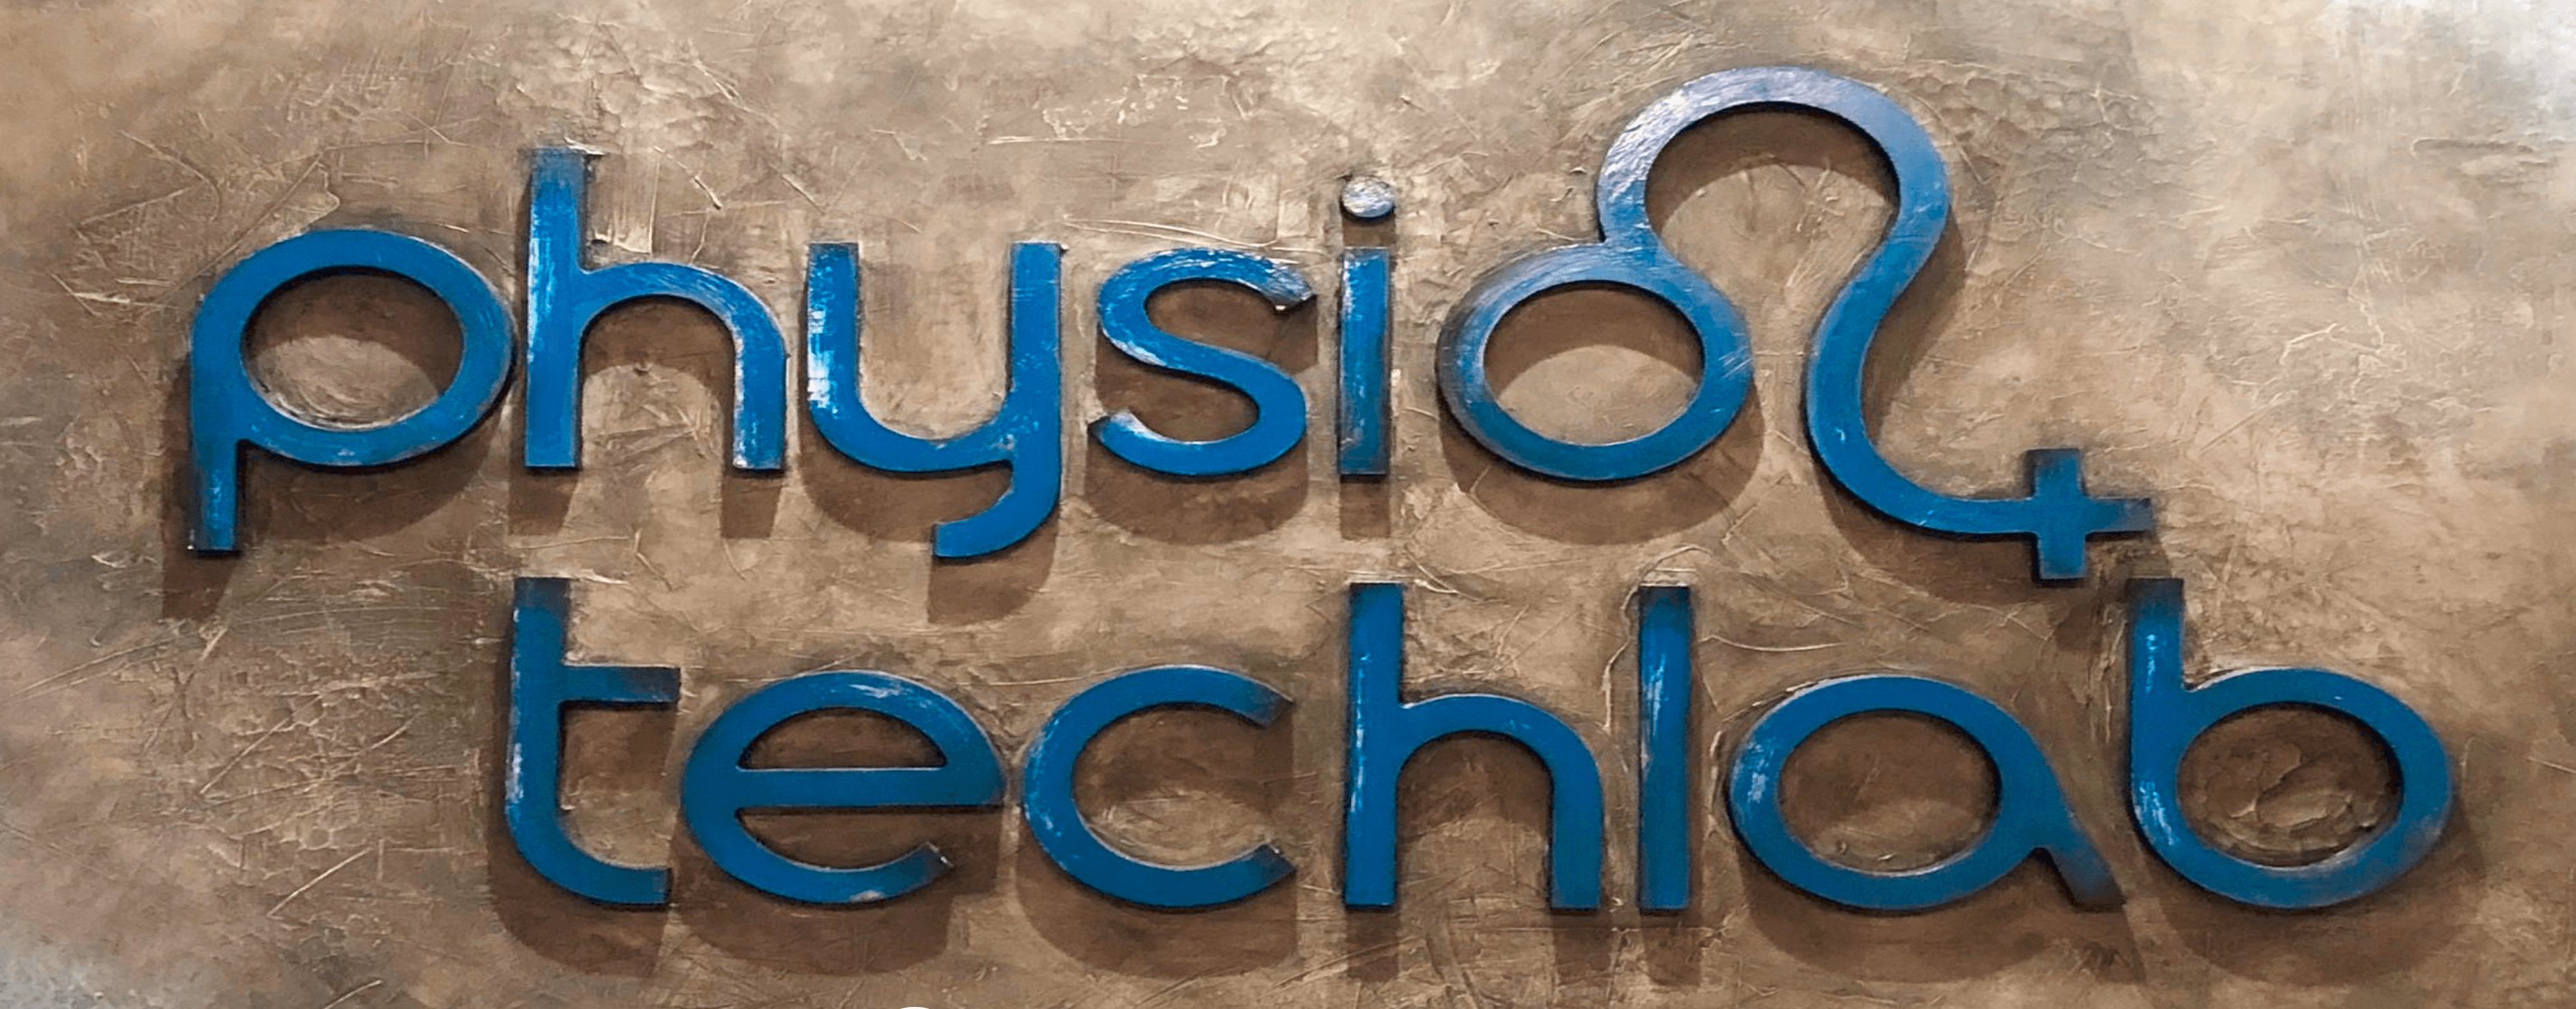 physiotechlab_banner_2